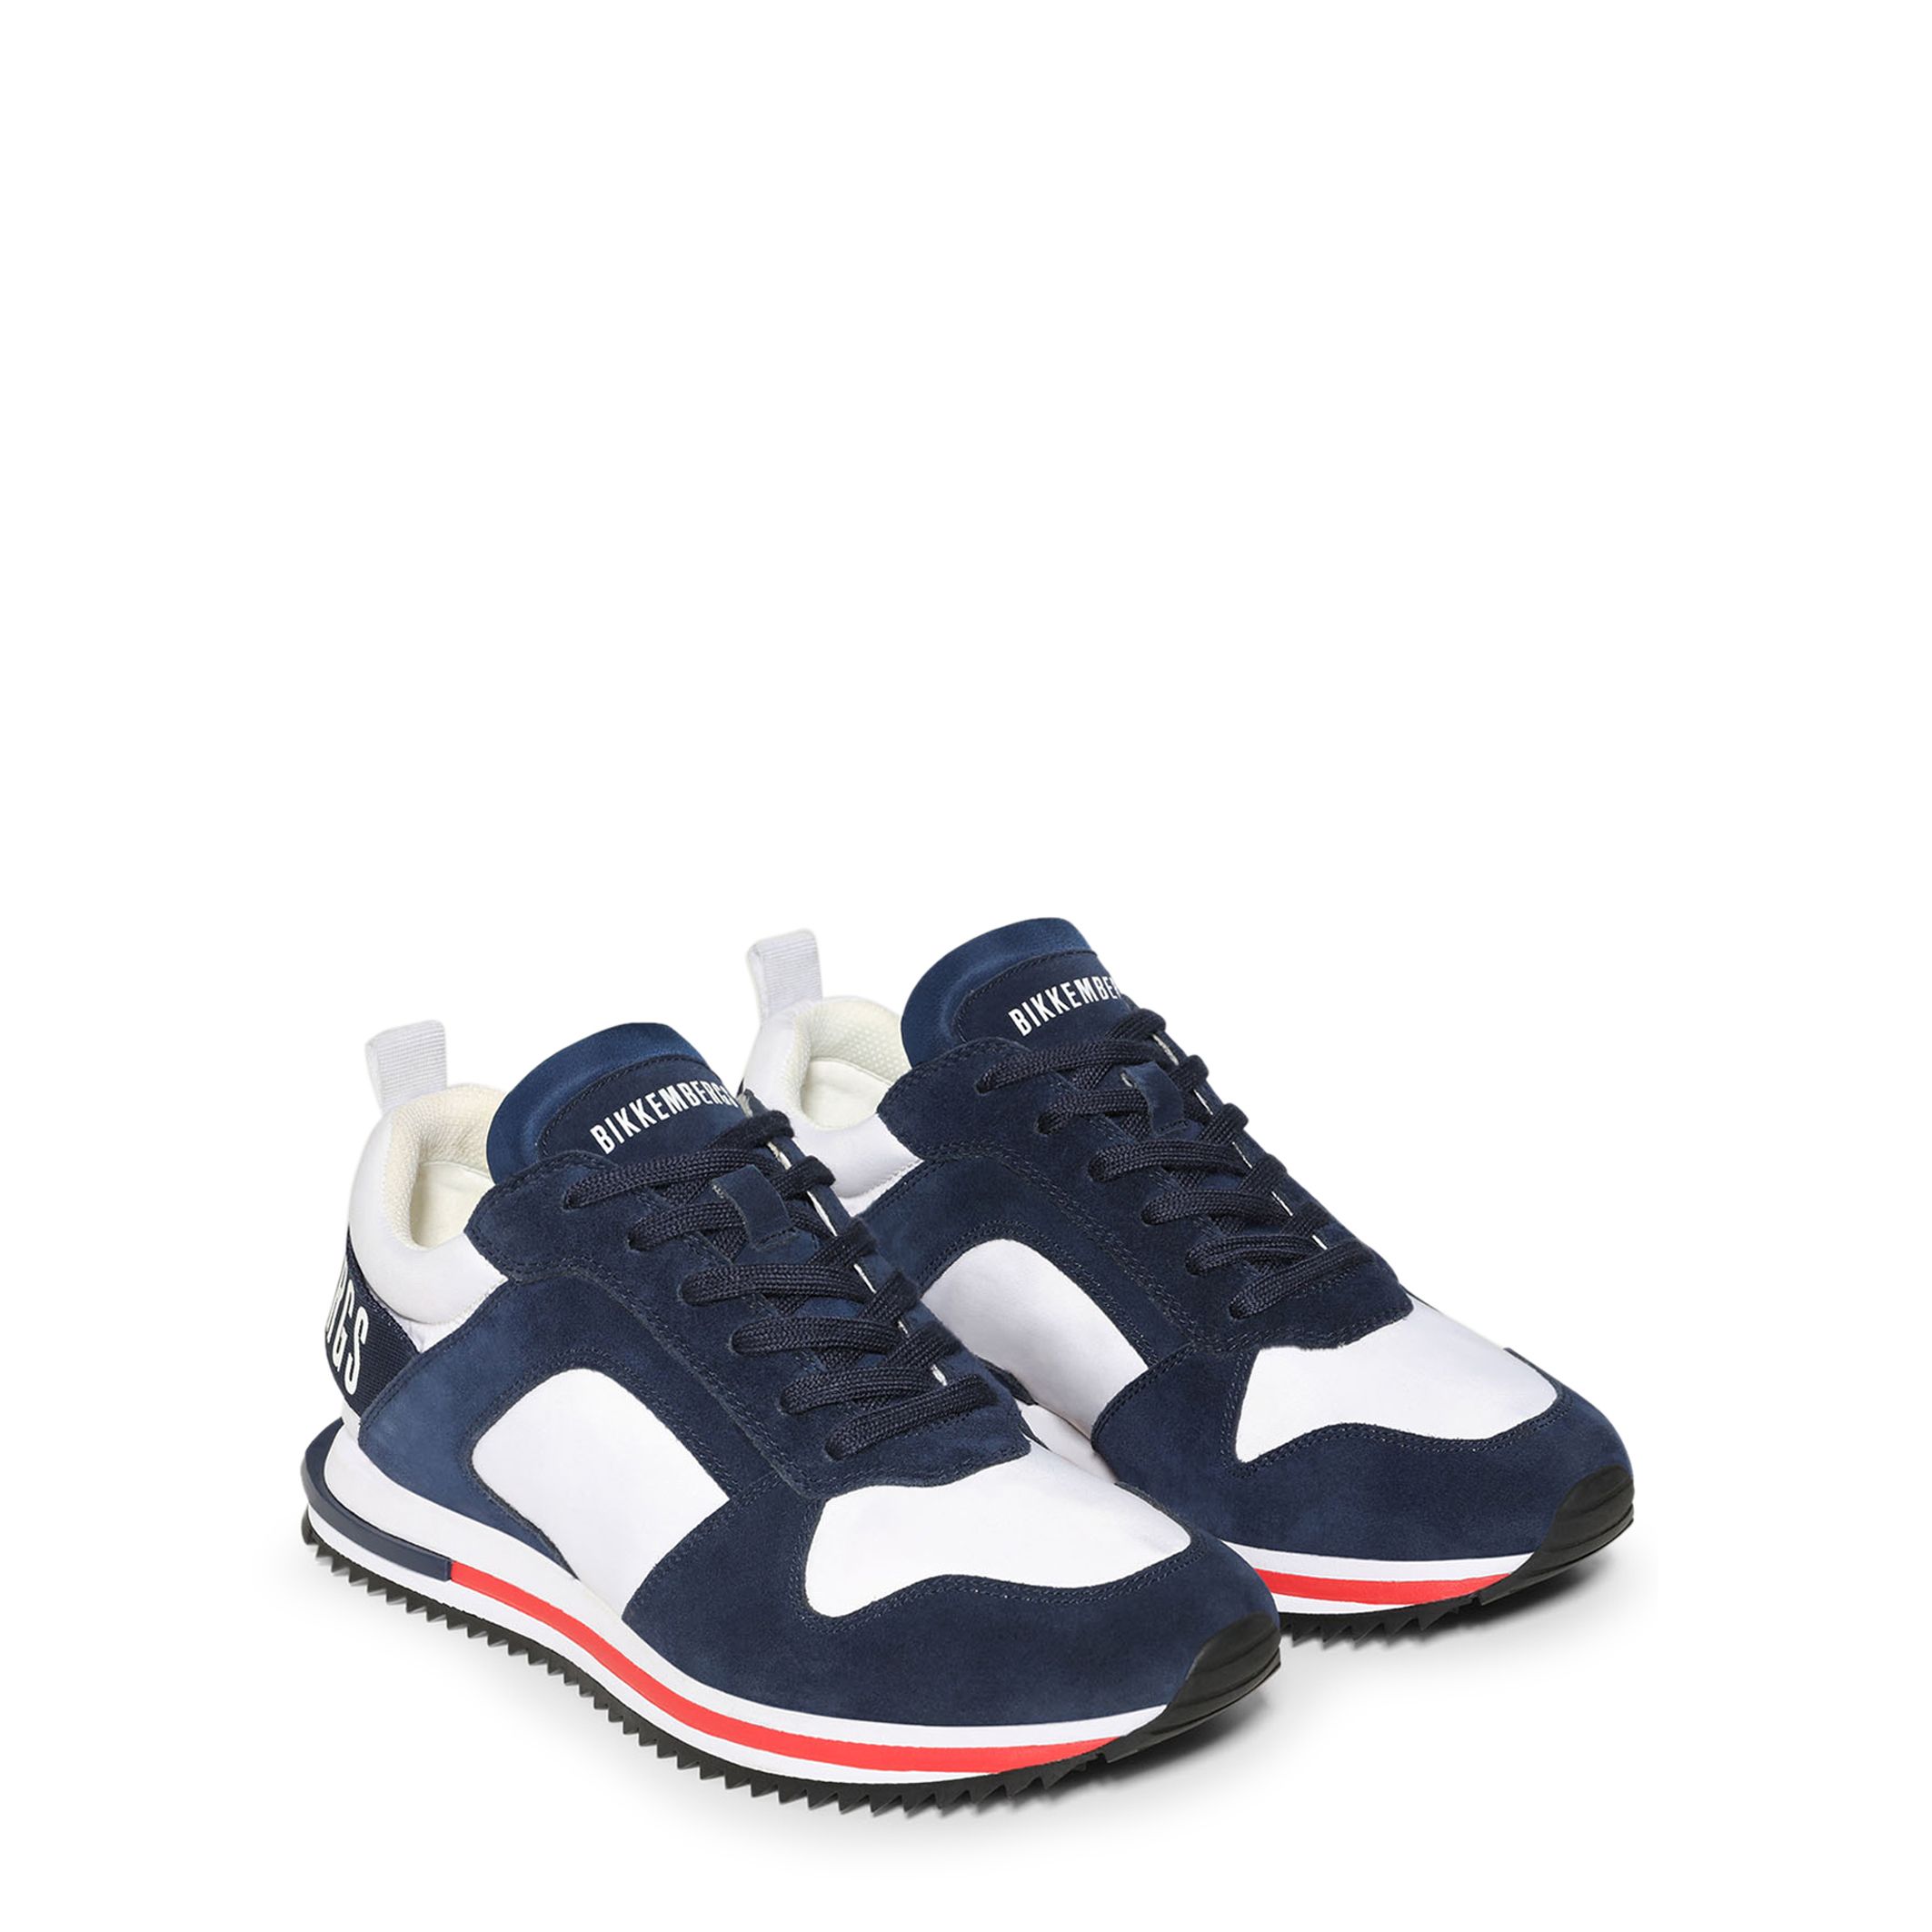 Gender: Woman <br> Type: Sneakers <br> Upper: synthetic material, suede <br> Insole: synthetic material <br> Internal lining: synthetic material <br> Sole: rubber <br> Details: round toe